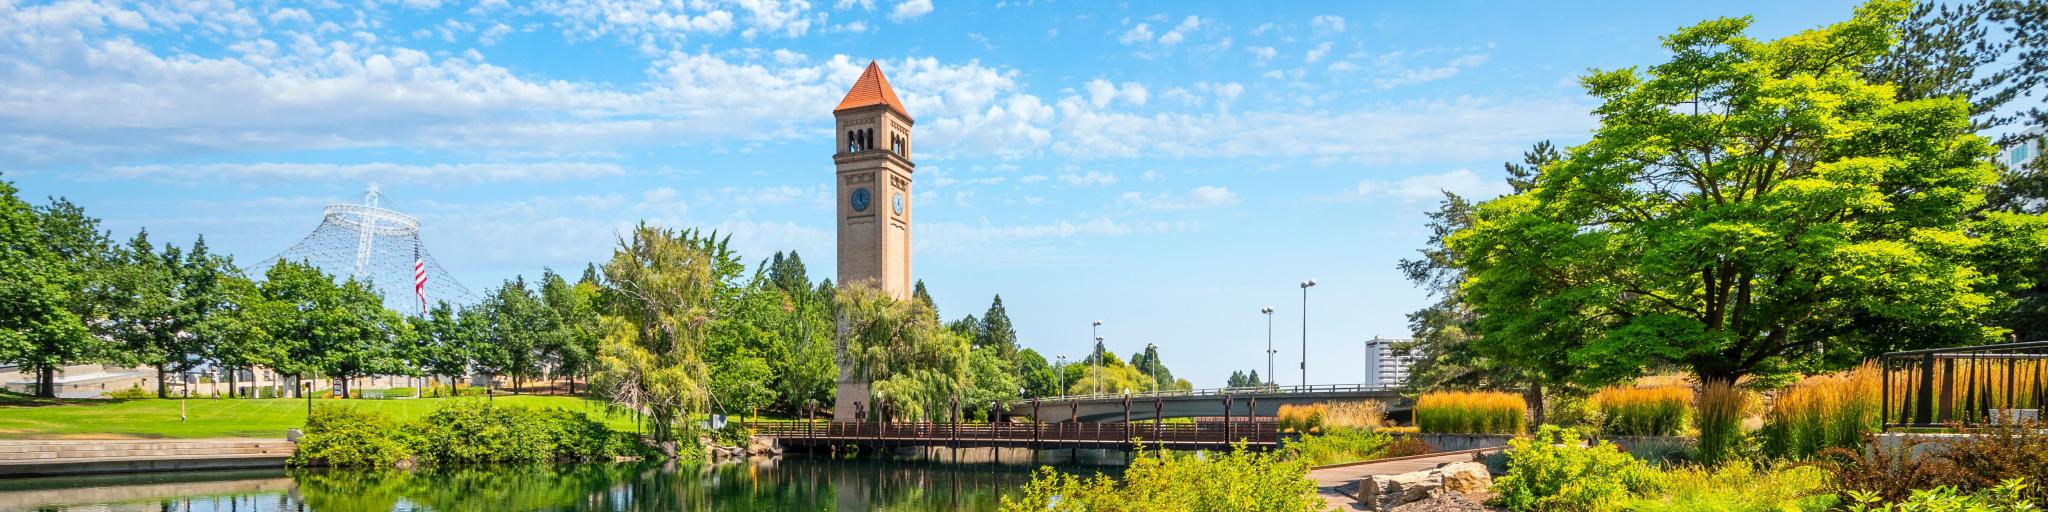 A summer day view of the Great Northern Clock Tower, Expo Pavilion, Spokane River